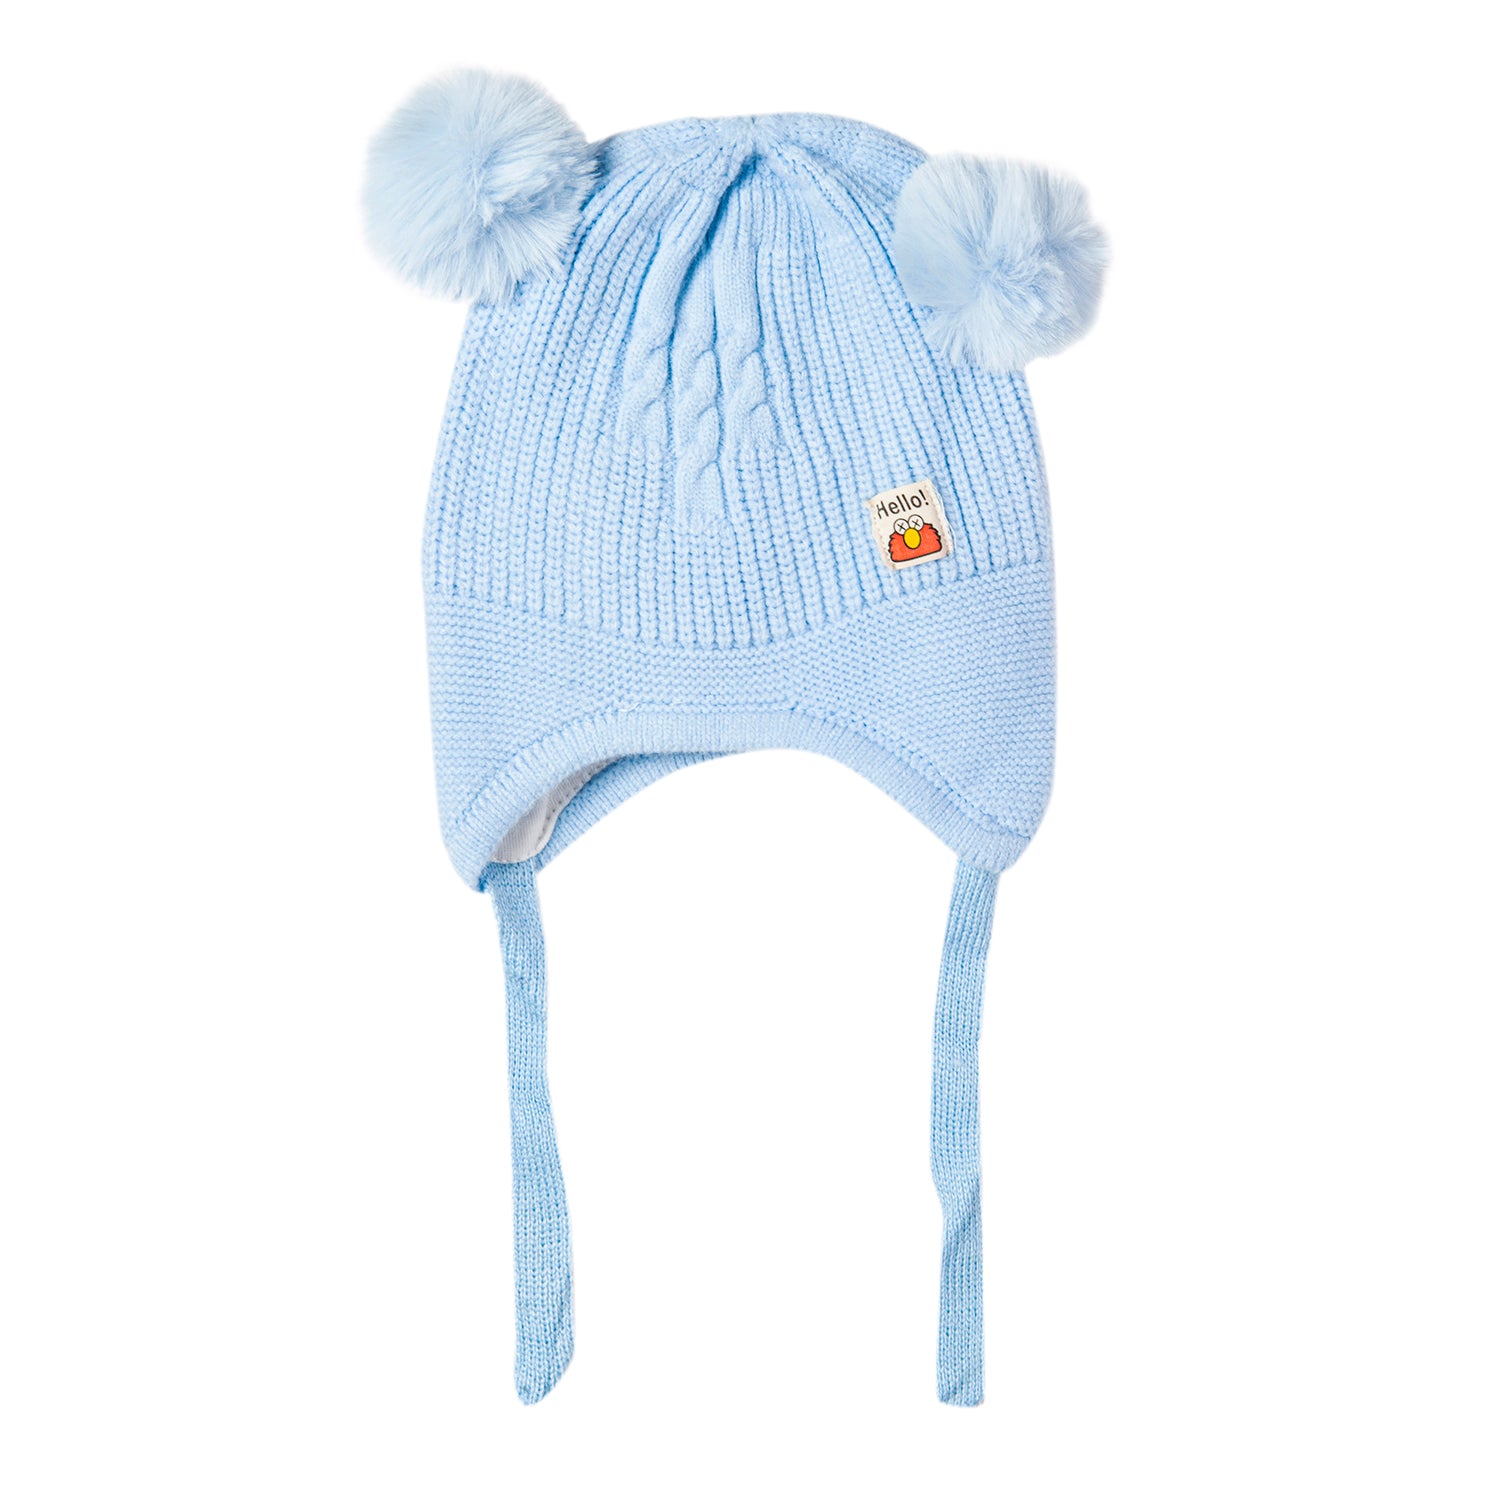 Knit Woollen Cap With Tie Knot For Ear Protection Solid Blue - Baby Moo